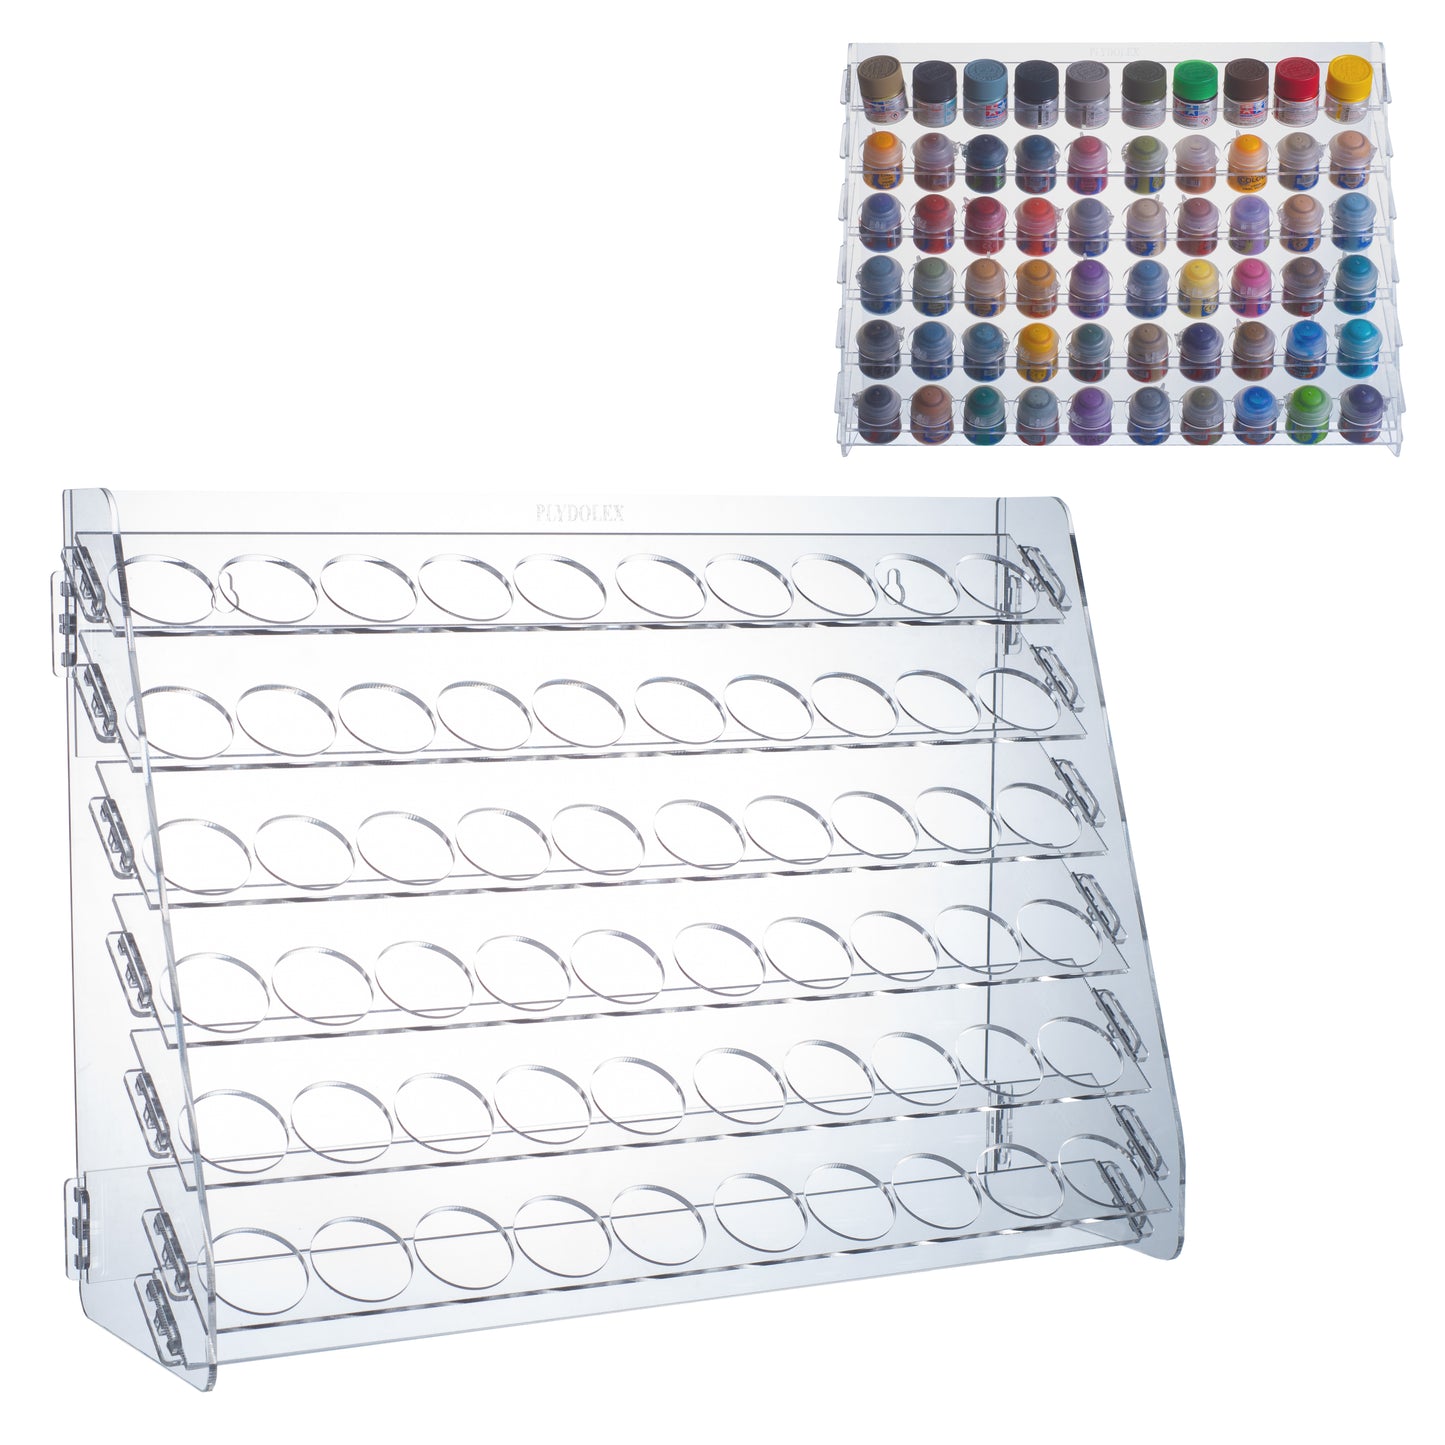 Plydolex Acrylic Paint Storage Organizer with 60 Holes For Citadel Pai –  Plywood Organizers for Miniaute Painters - Wooden HandCraft Gift and  Accessories by Plydolex